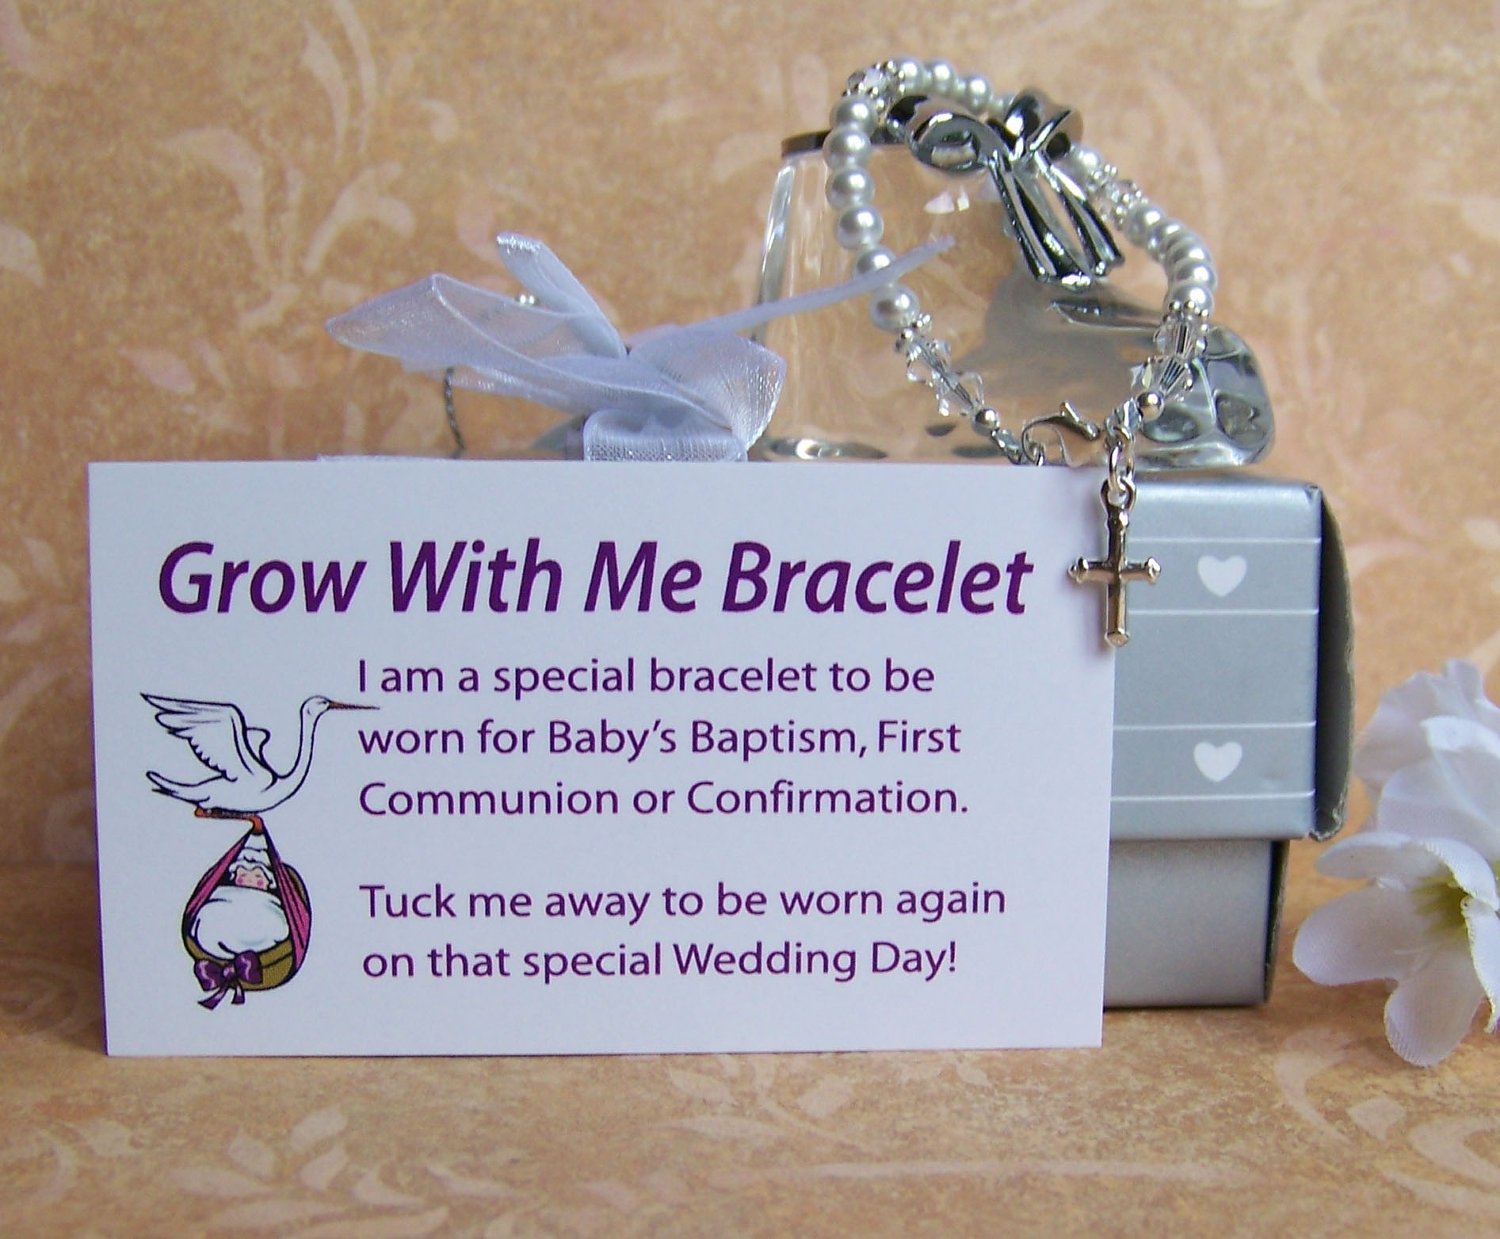 10 Unique Baptism Gift Ideas For Boys baby girl baptism bracelet grow with me 38 00 via etsy its a 1 2022